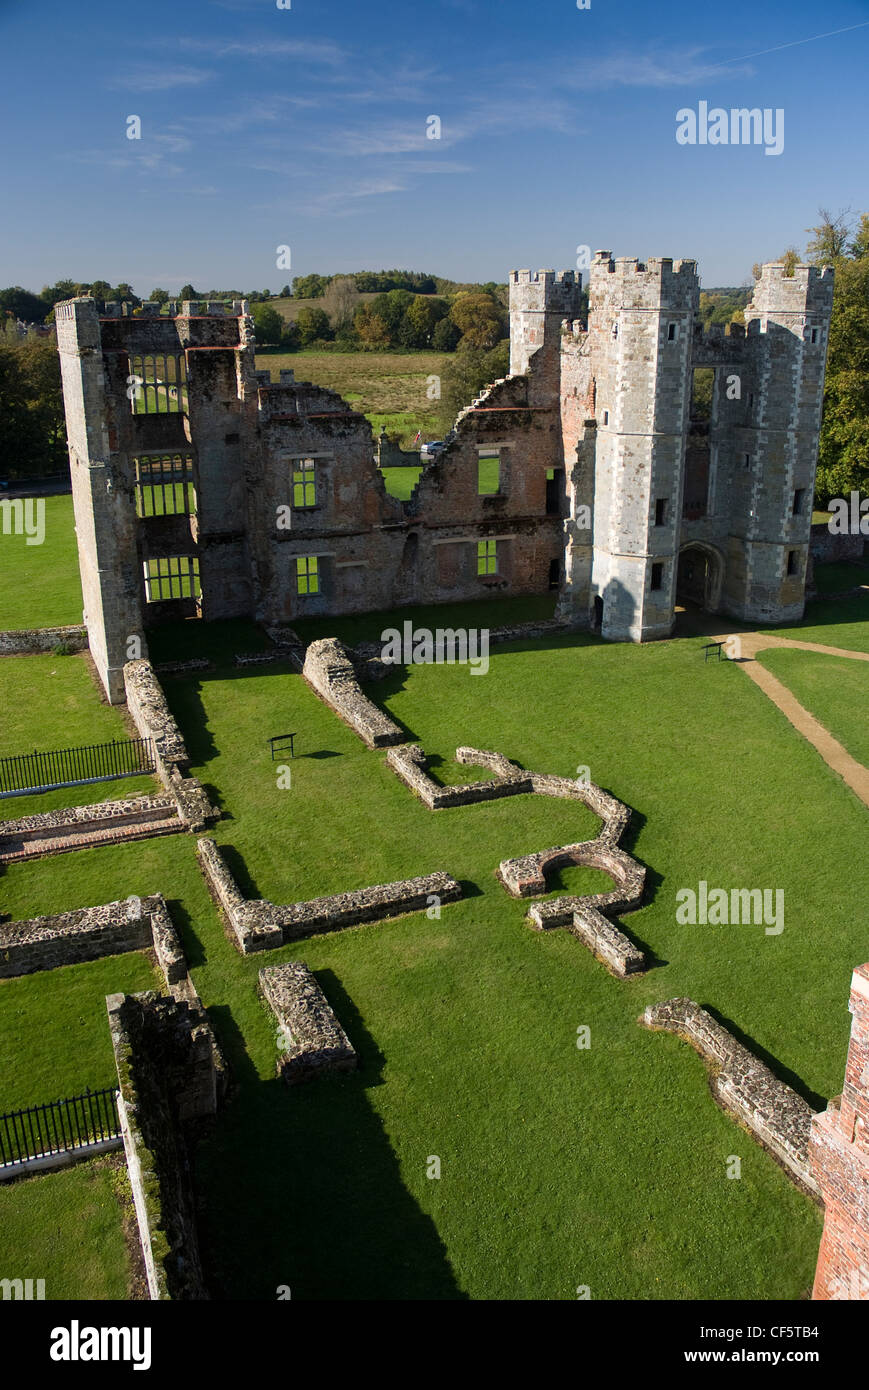 The ruins of Cowdray Ruins, one of Southern England's most important early Tudor courtier's palaces set in the grounds of Cowdra Stock Photo